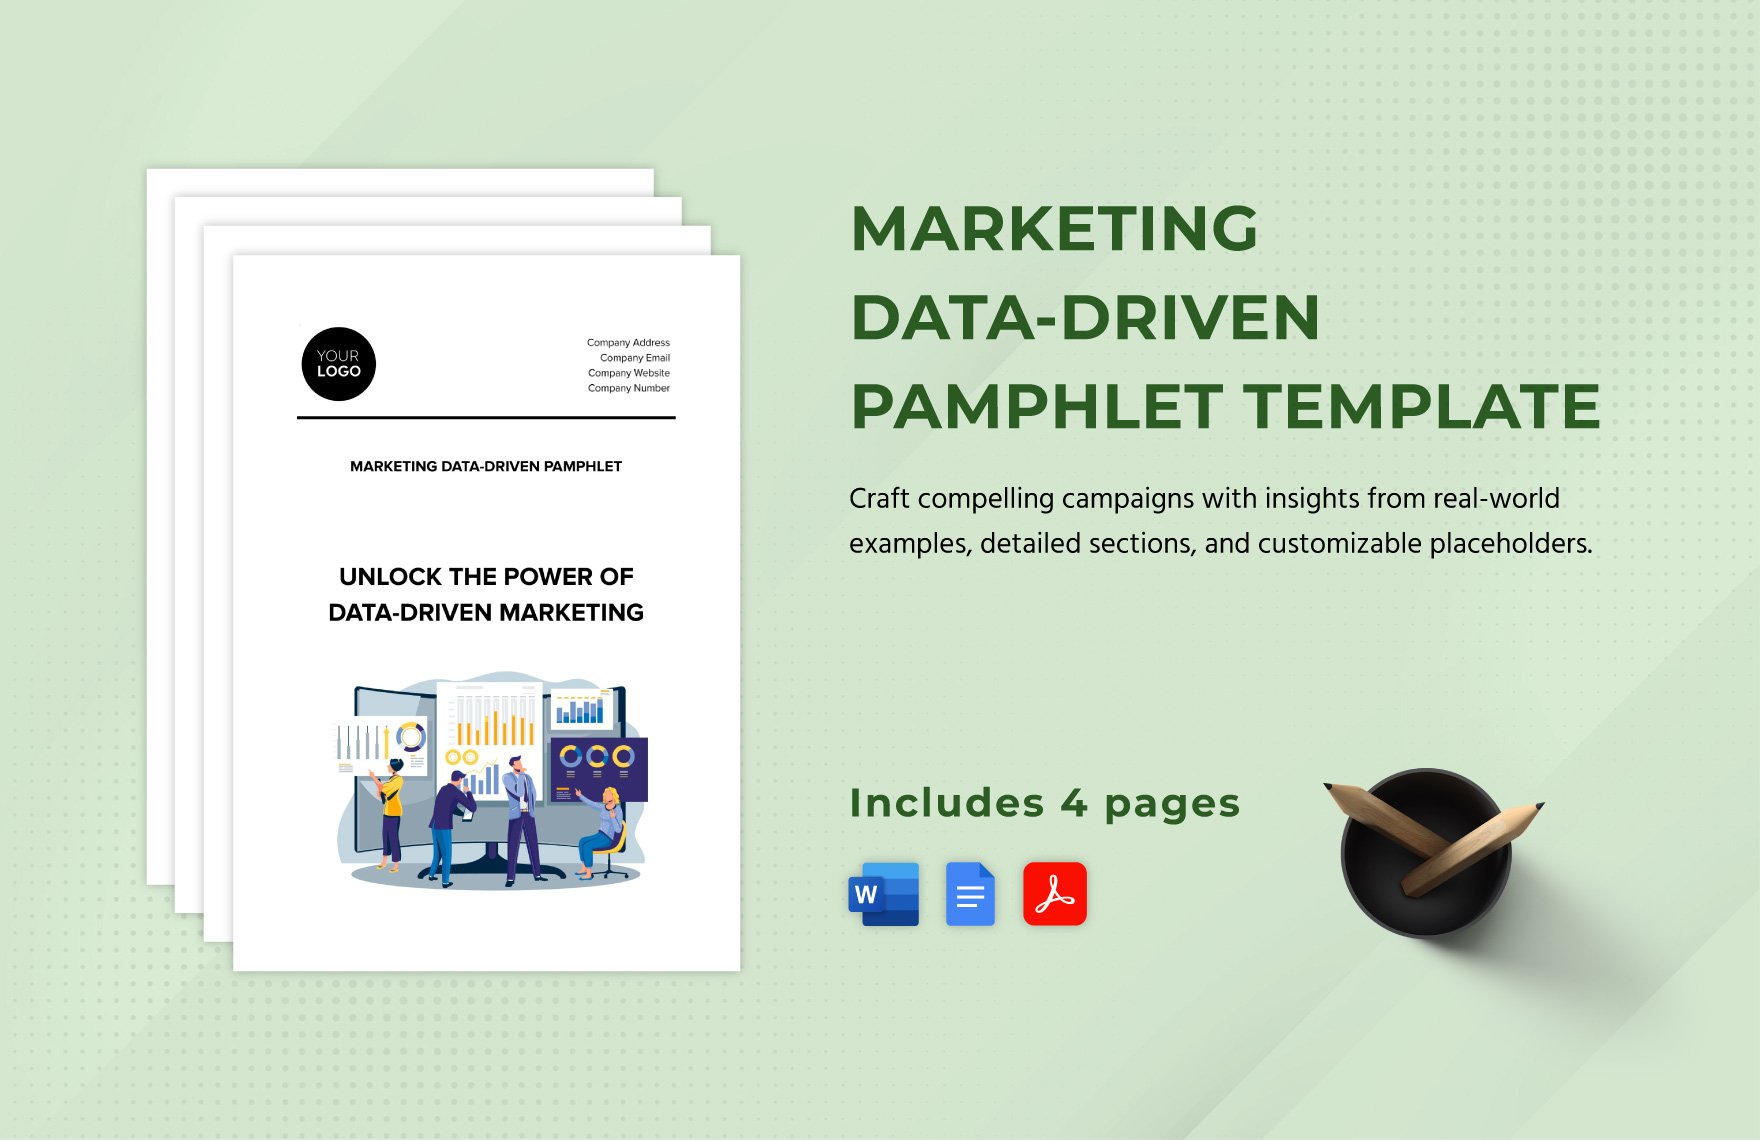 Marketing Data-Driven Pamphlet Template